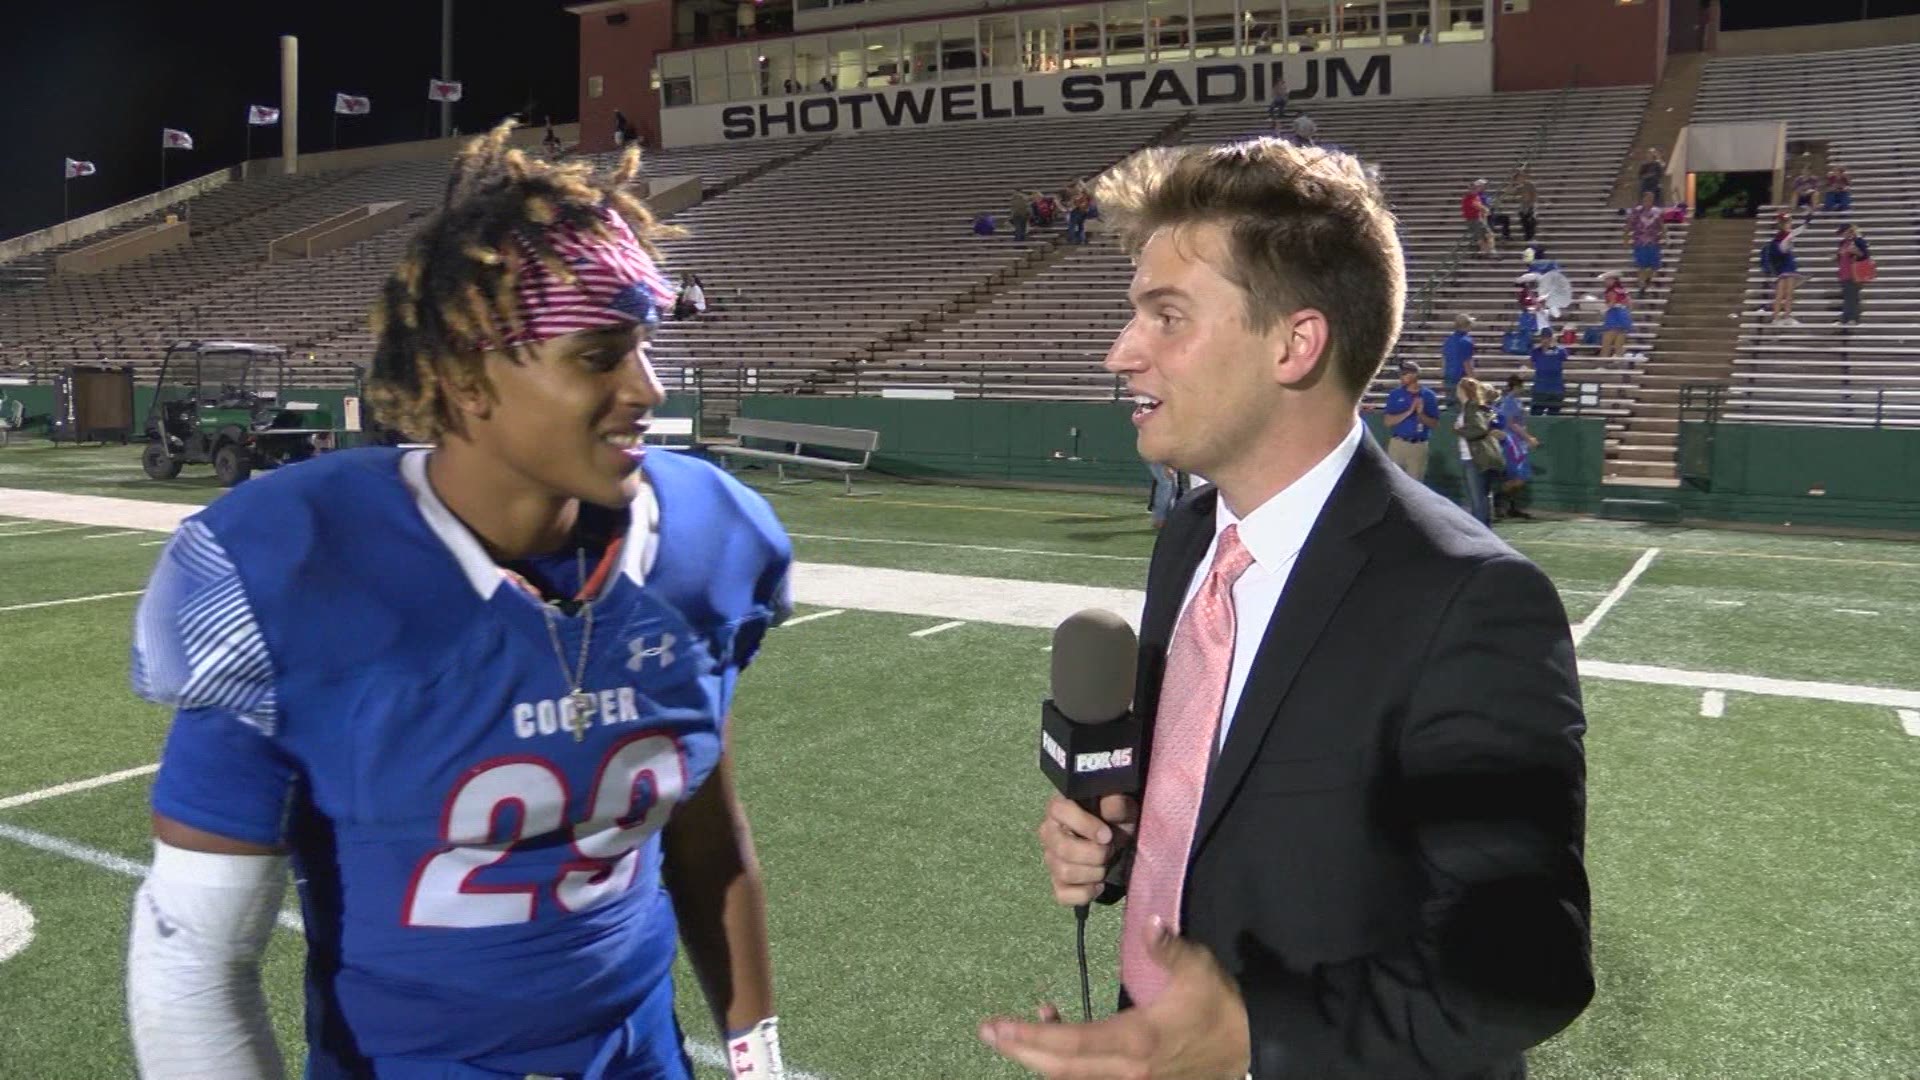 Linebacker Aeneas Favors found his way into the end zone twice in the Cougars win over Wylie. He talked about how proud he was to pick up the win.